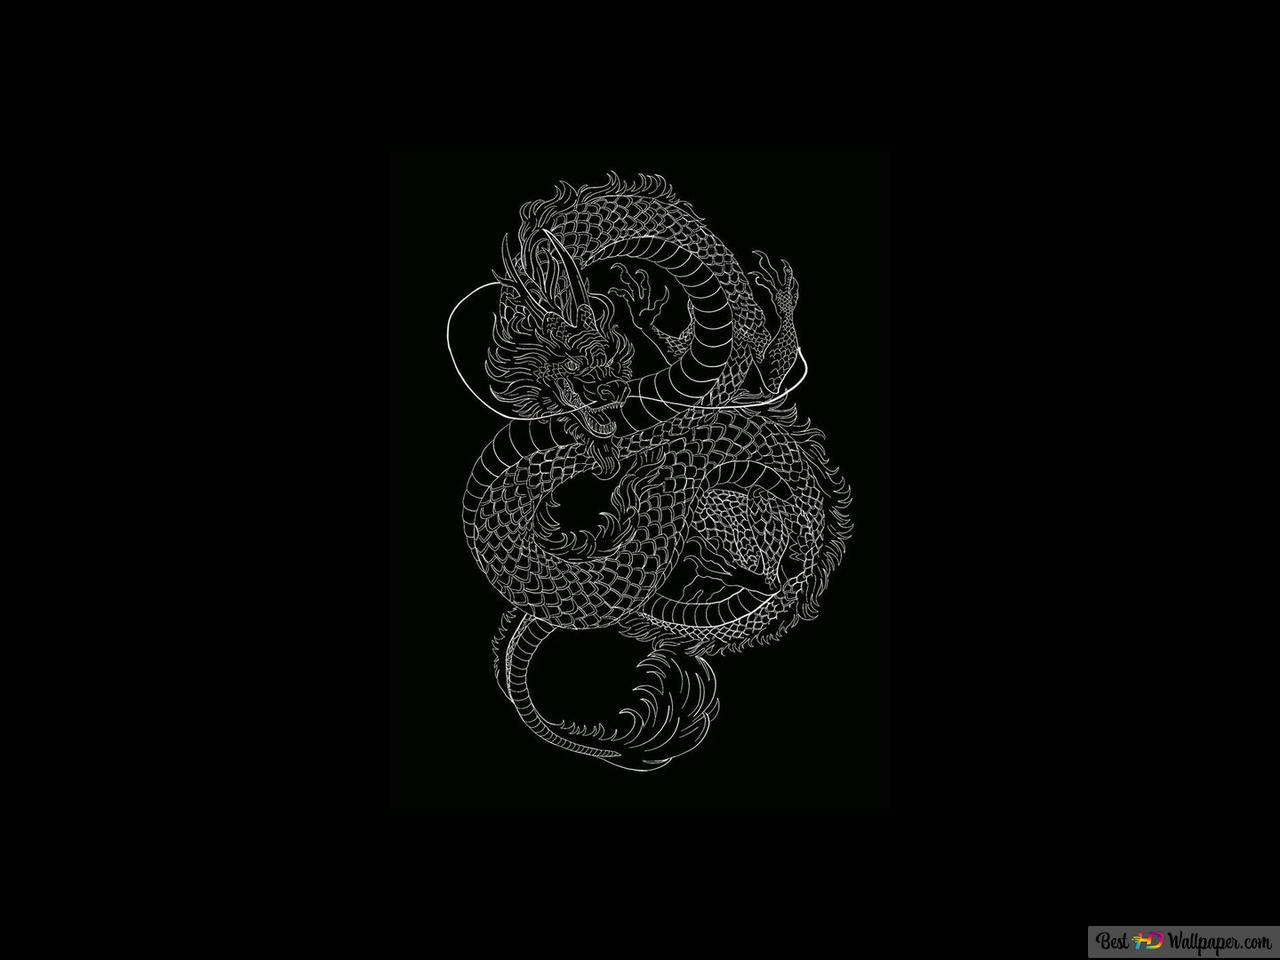 Dragon minimalist drawing black and white HD wallpaper download and White wallpaper